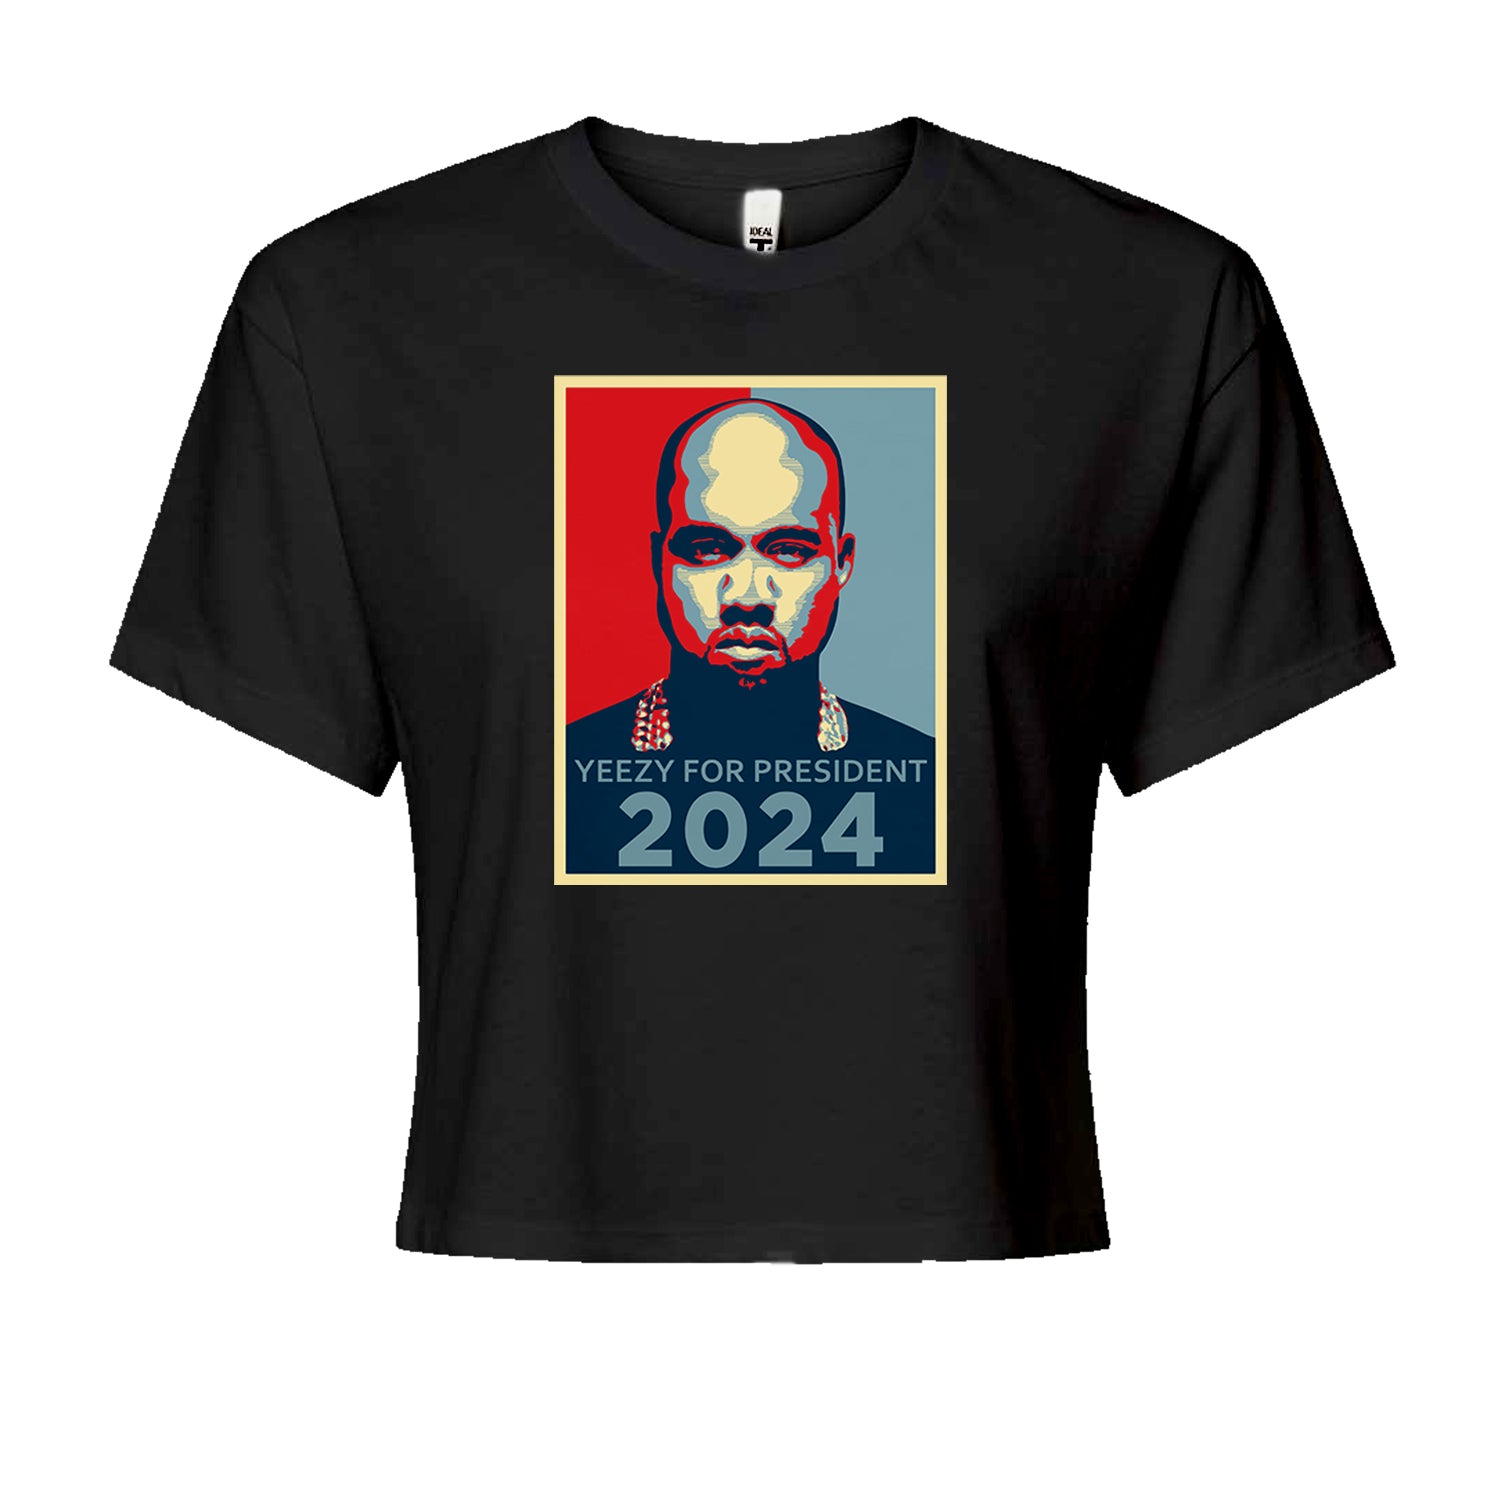 Yeezus For President Vote for Ye Cropped T-Shirt Black